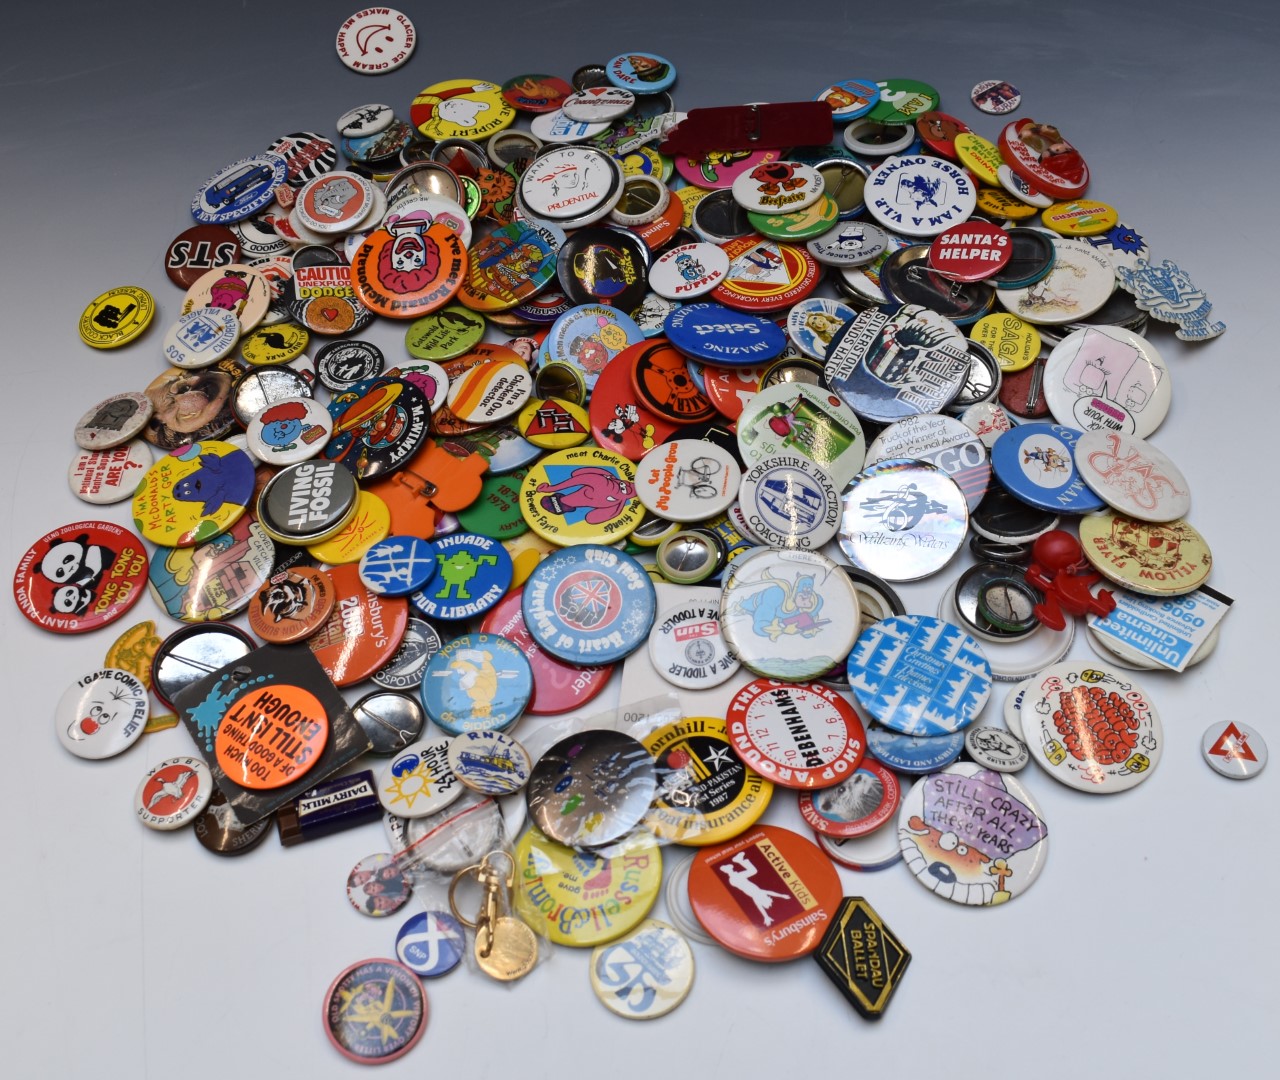 Over 1000 vintage and collectable badges including social history, advertising, humorous, slogans, - Image 7 of 9